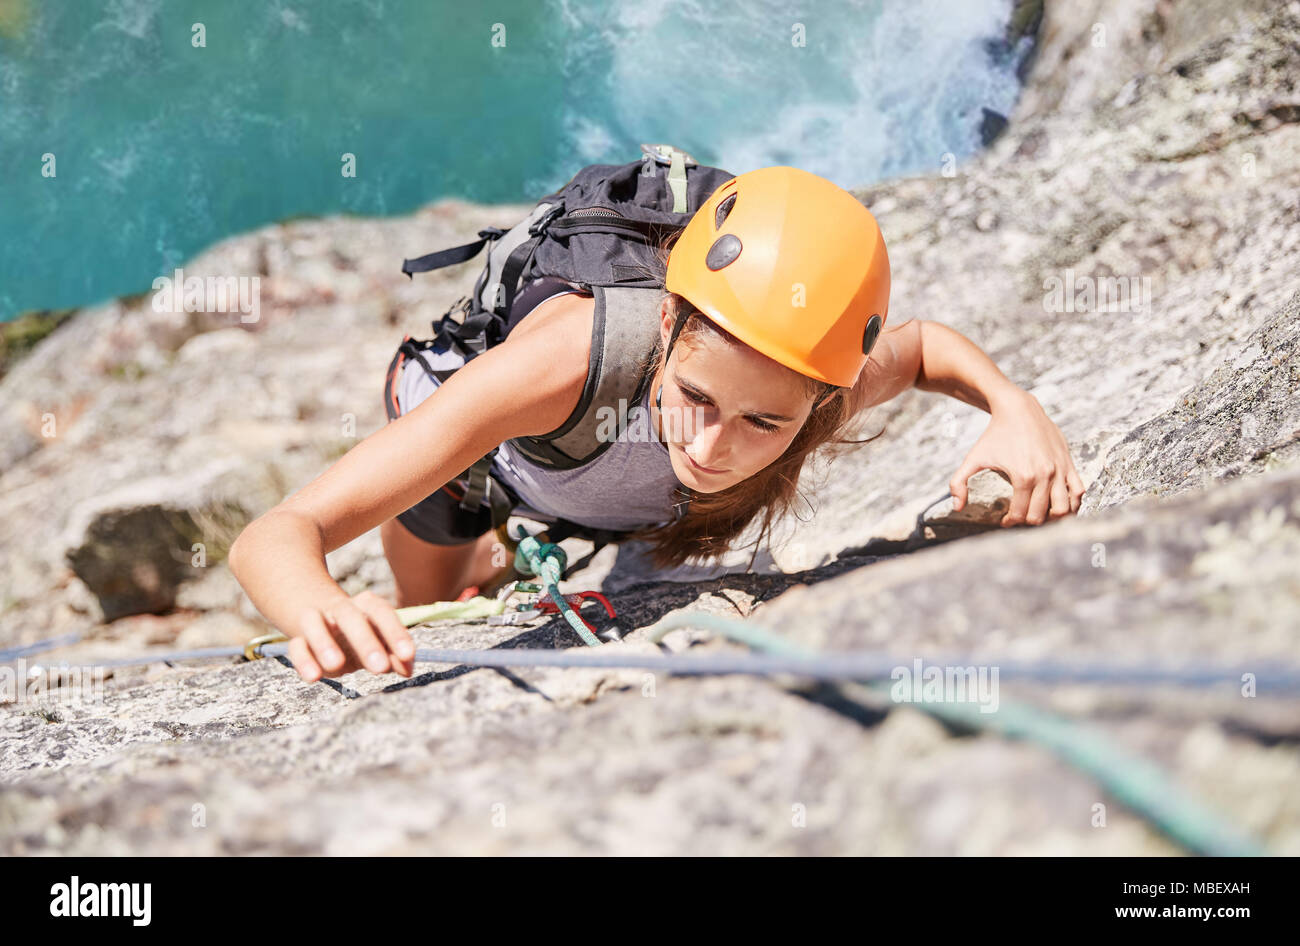 Focused, determined female rock climber scaling rock Stock Photo